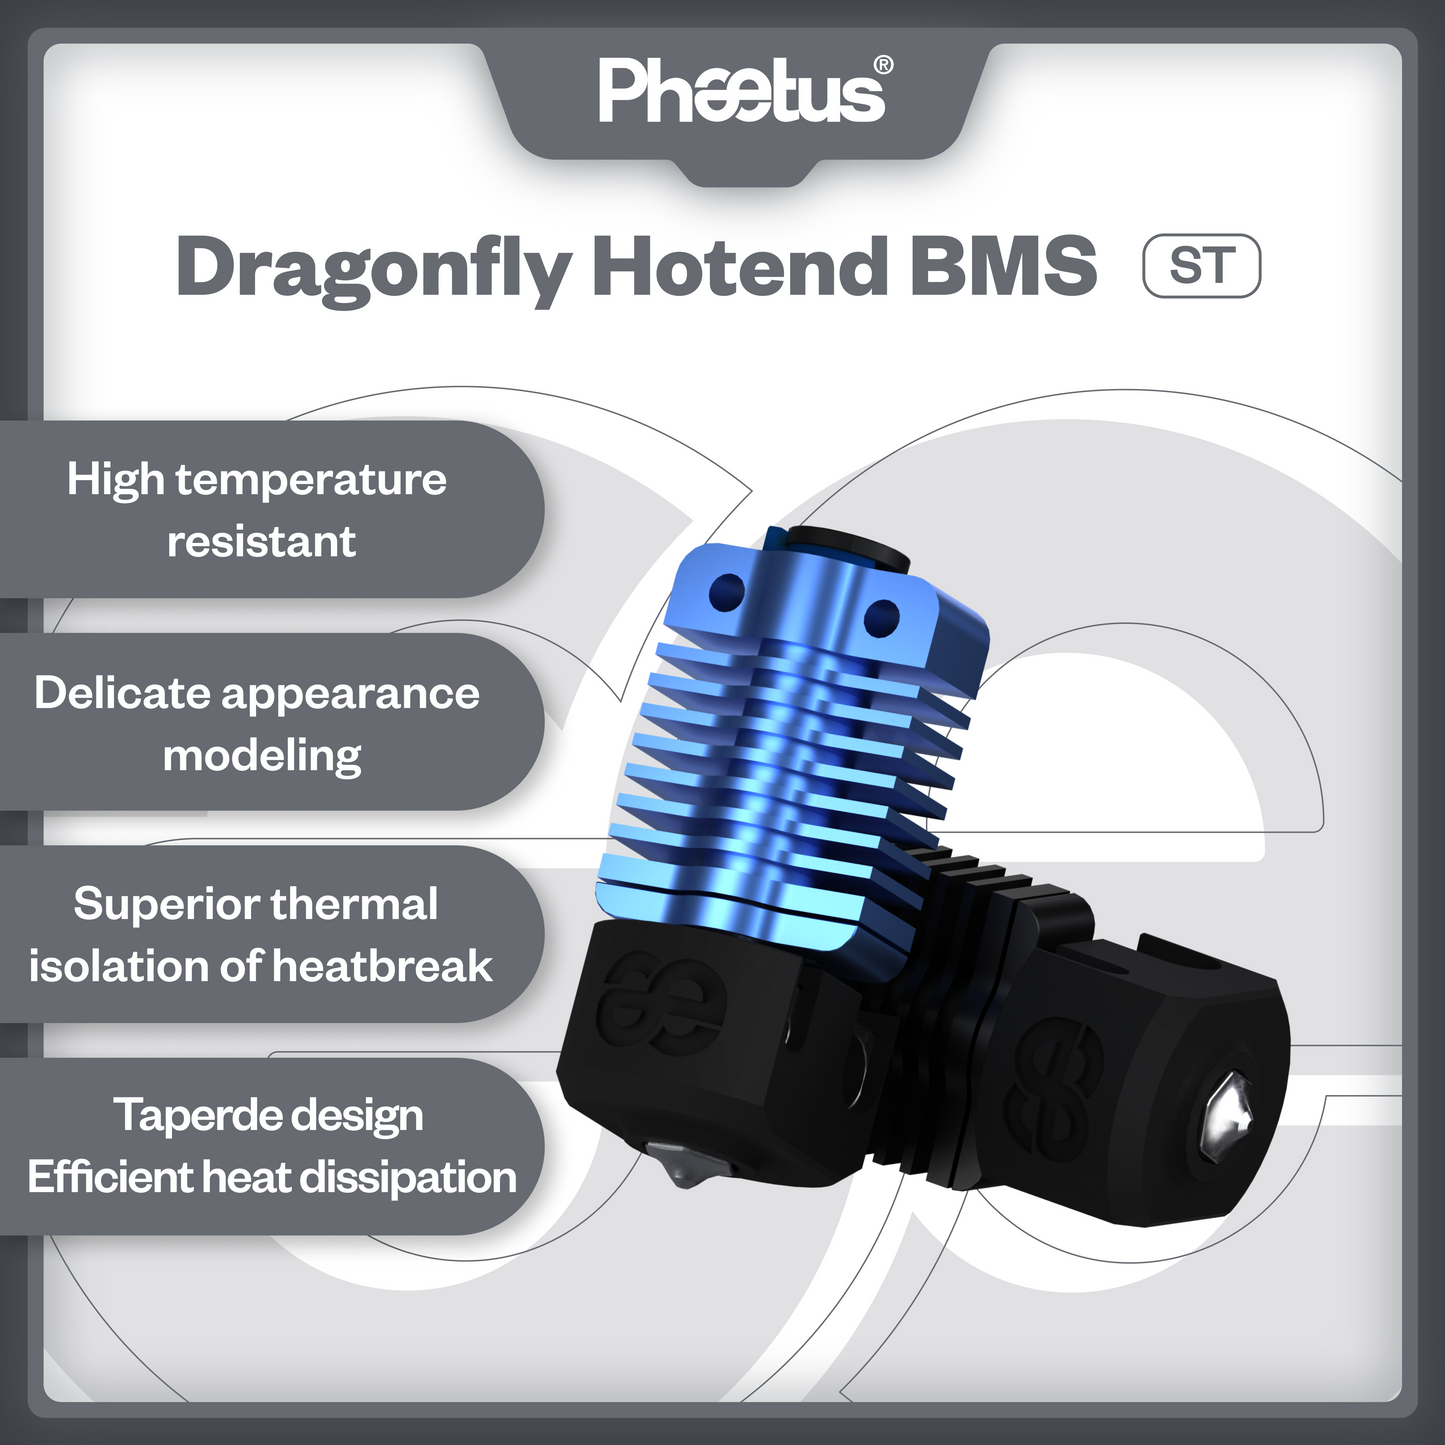 DRAGONFLY HOTEND BMS